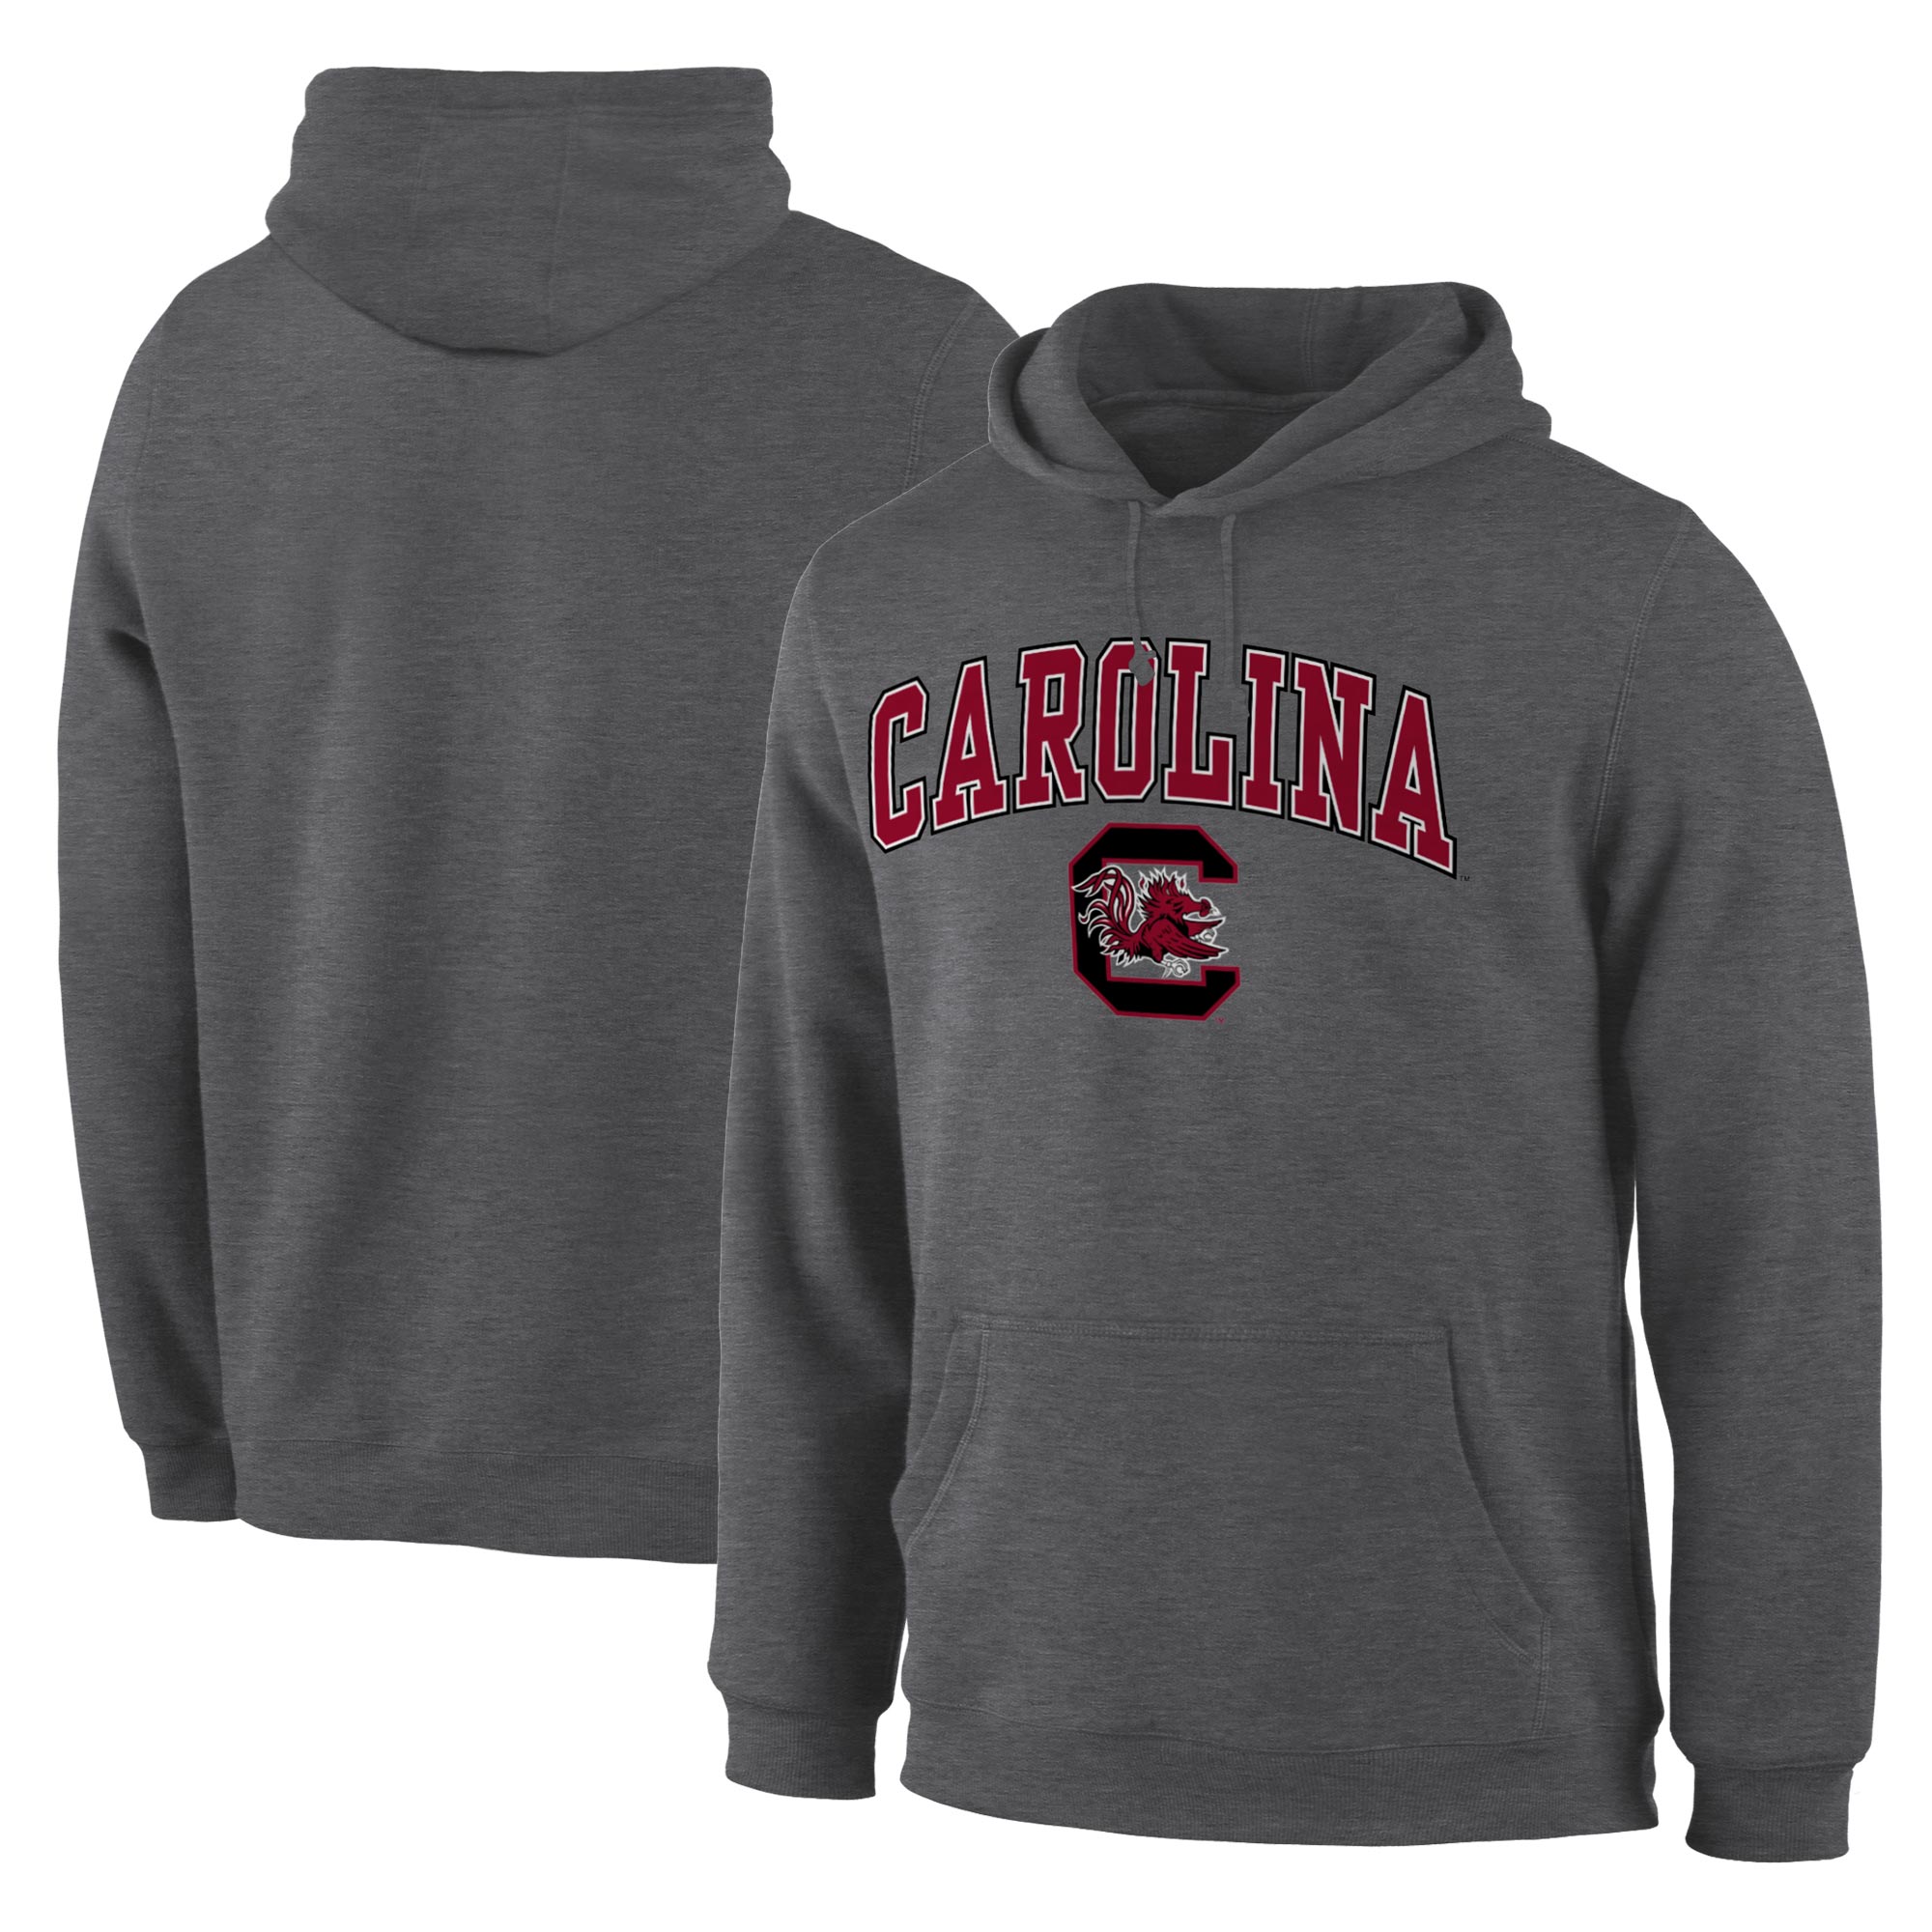 South Carolina Gamecocks Charcoal Campus Pullover Hoodie